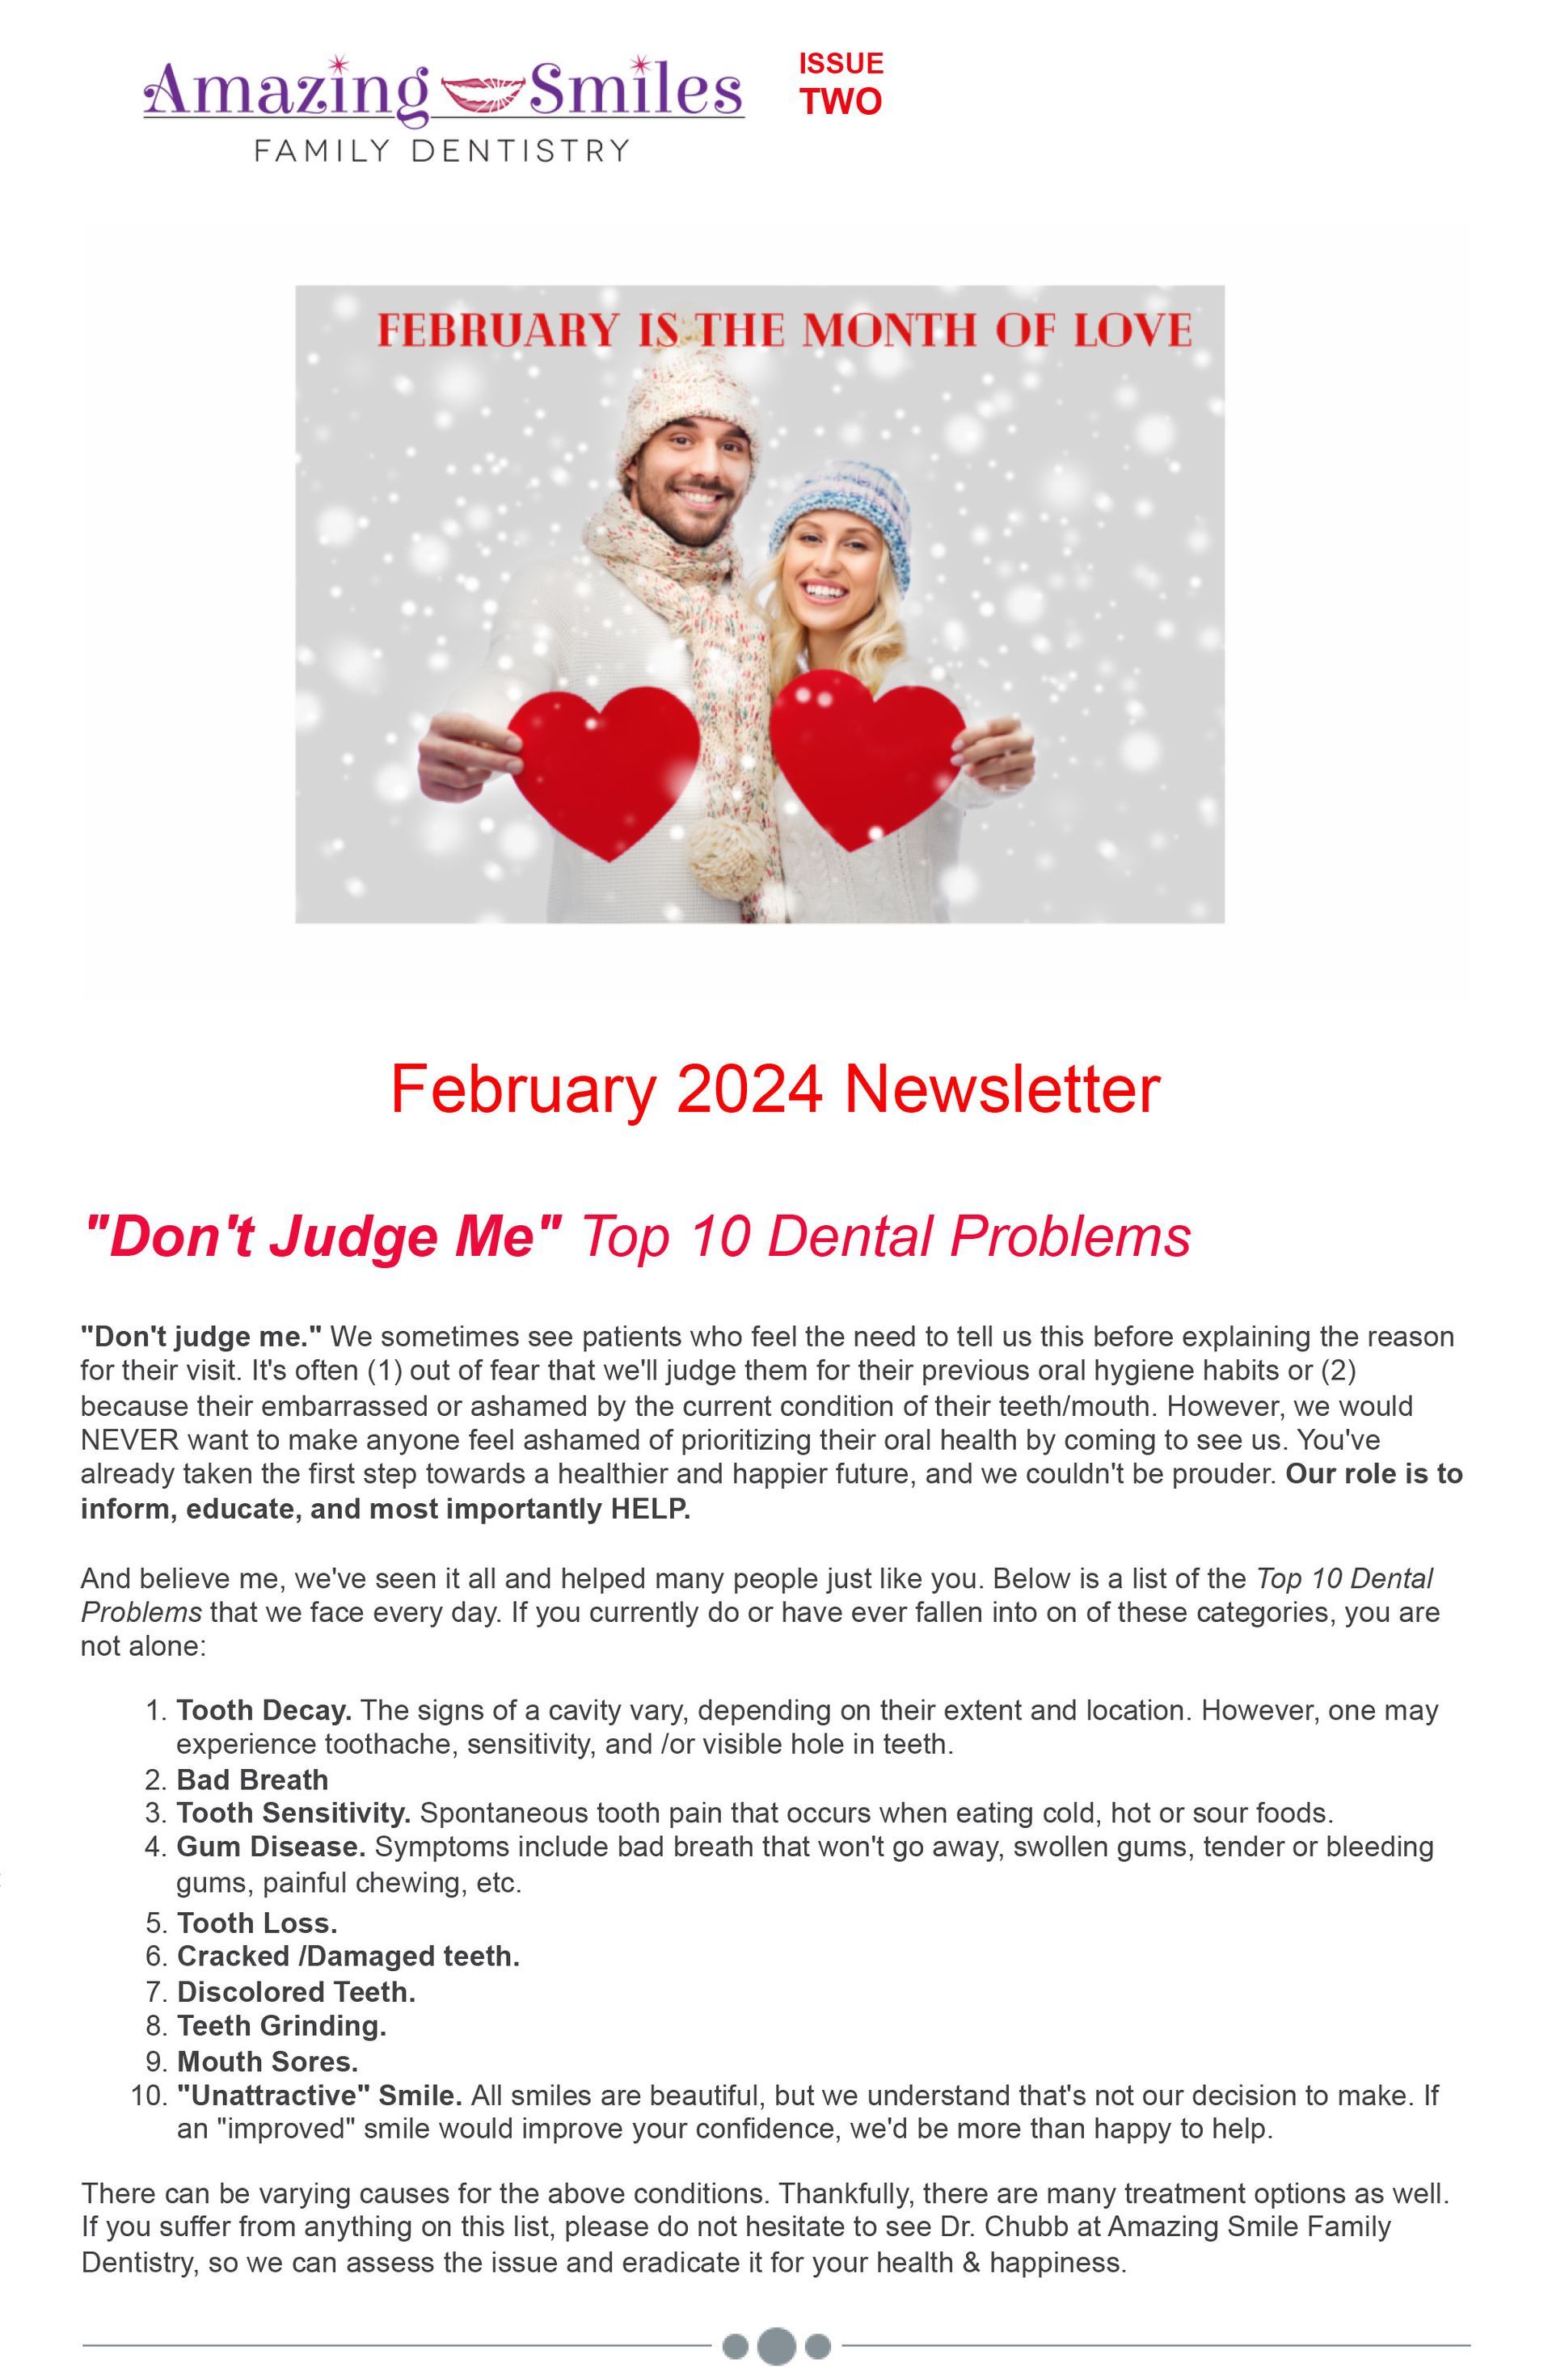 February 2024 Newsletter Page 1